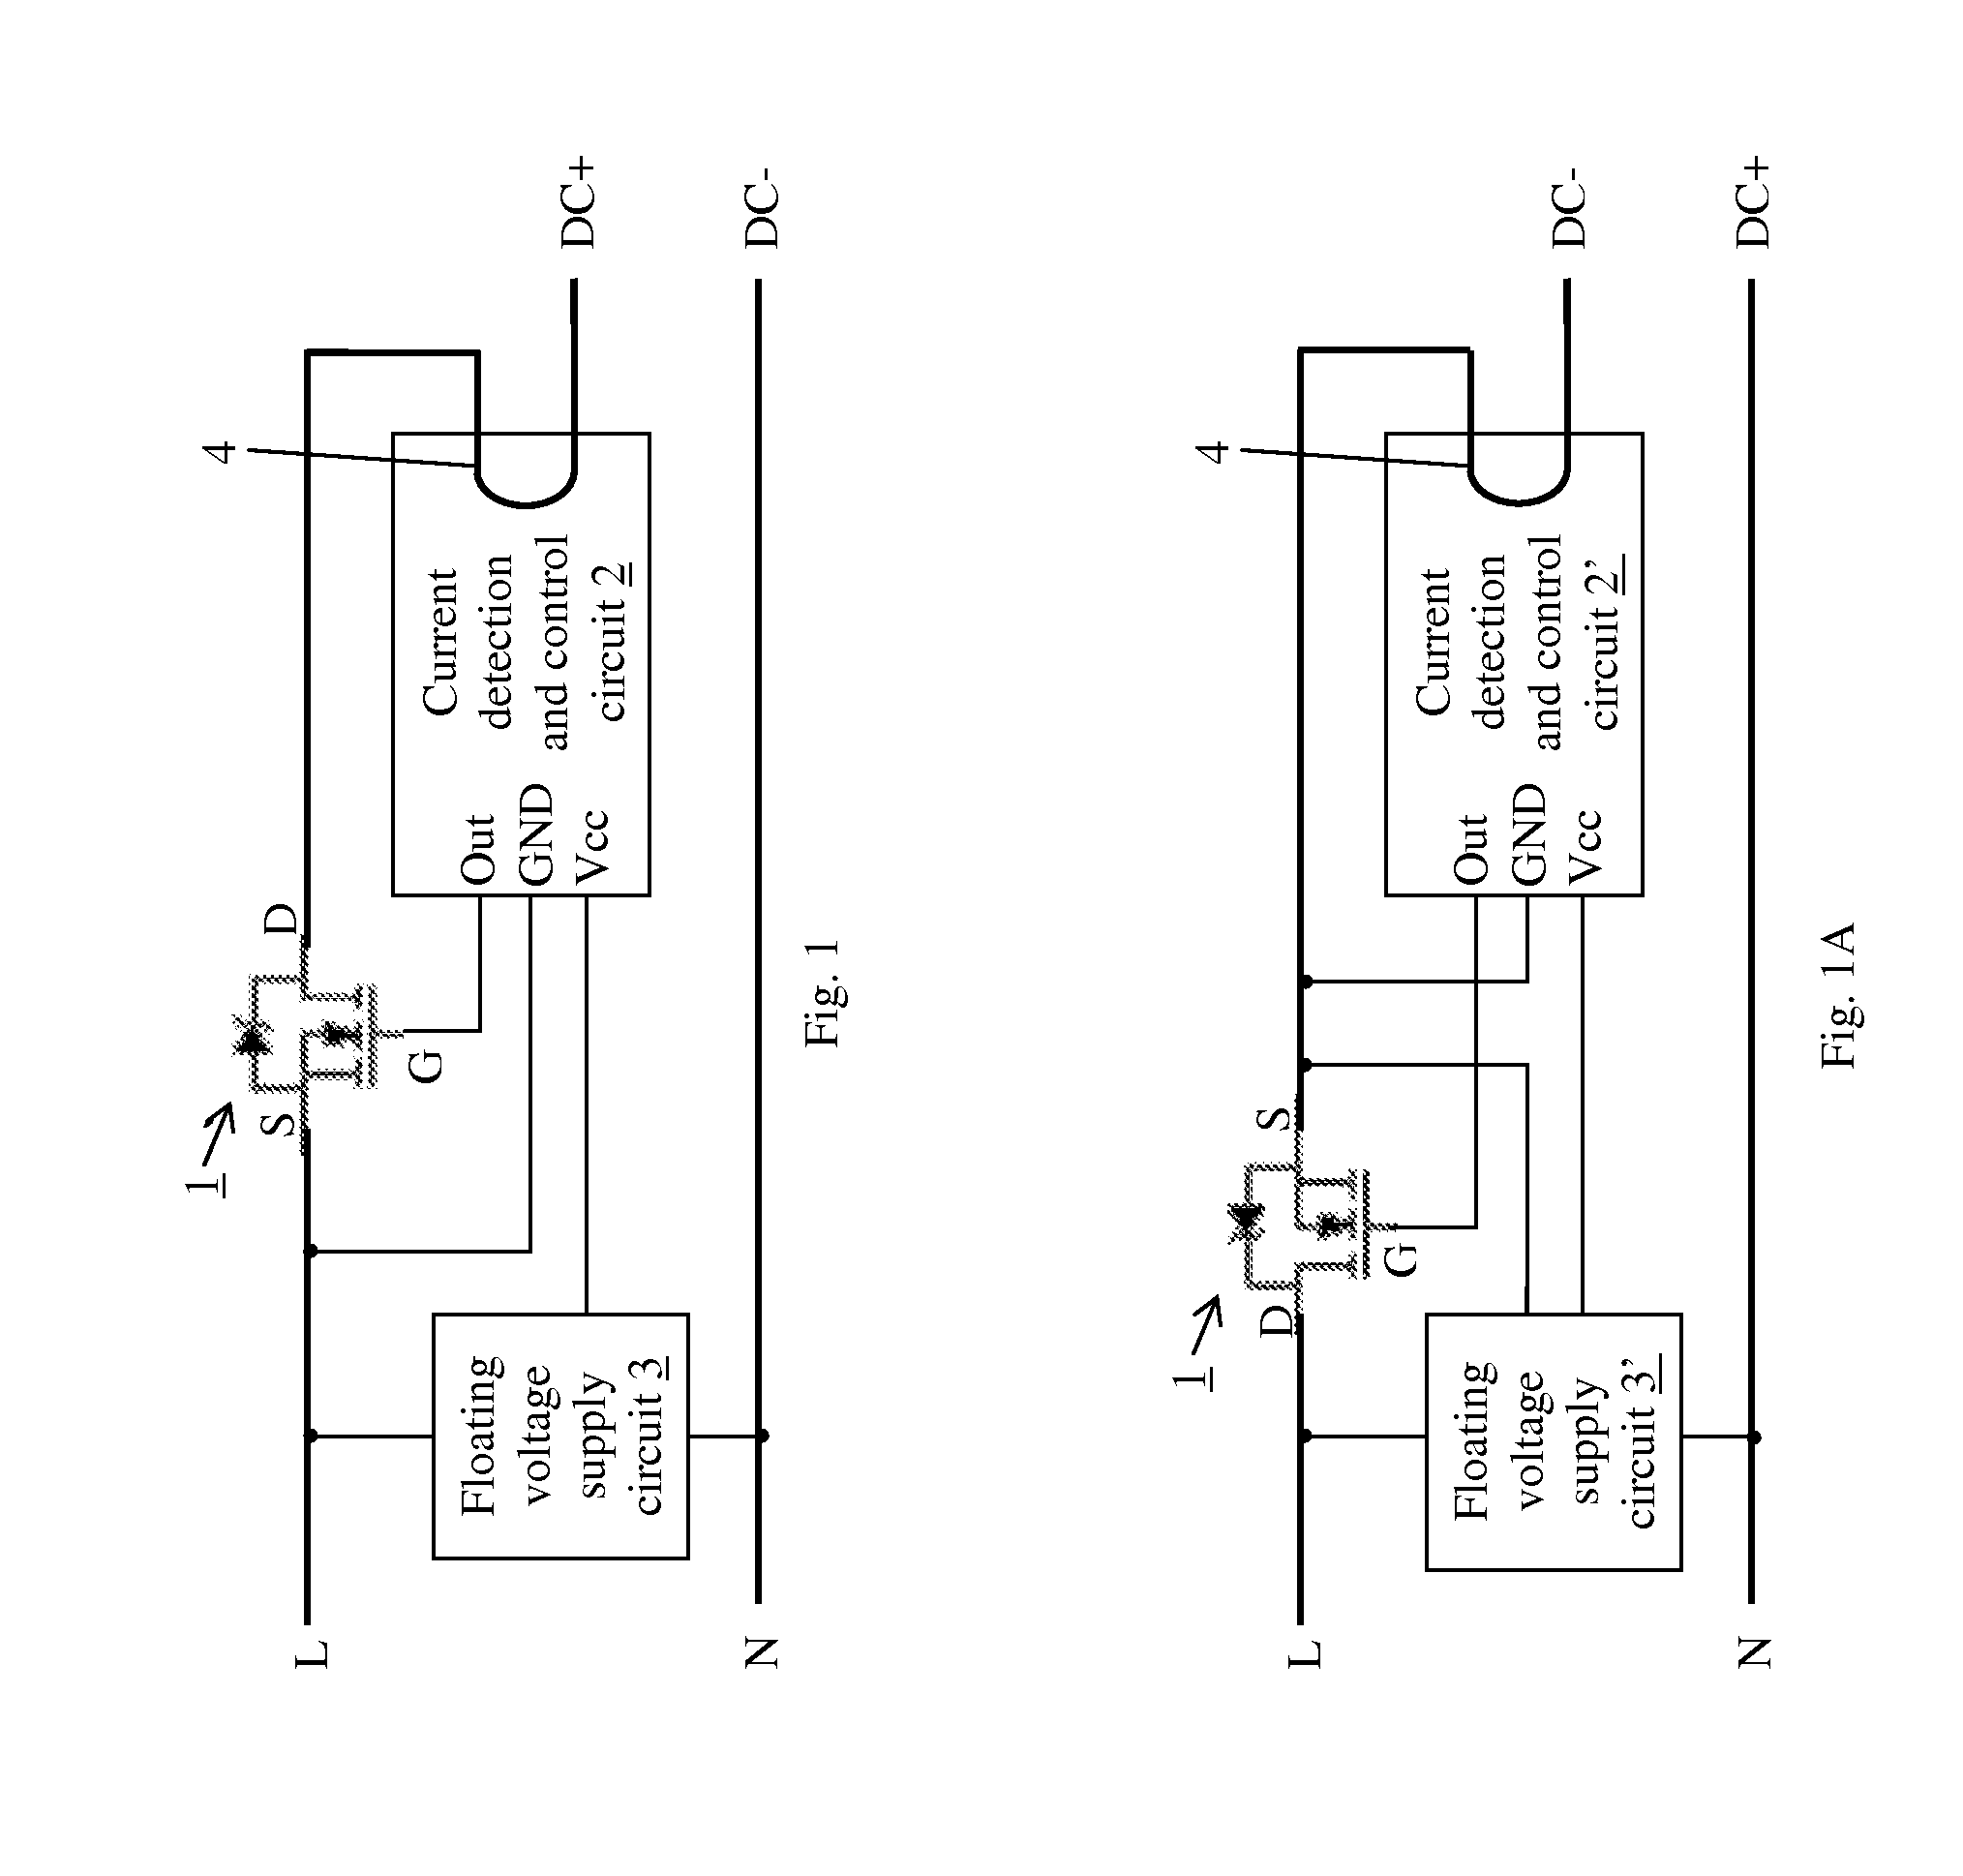 Active switching rectifier employing mosfet and current-based control using a hall-effect switch